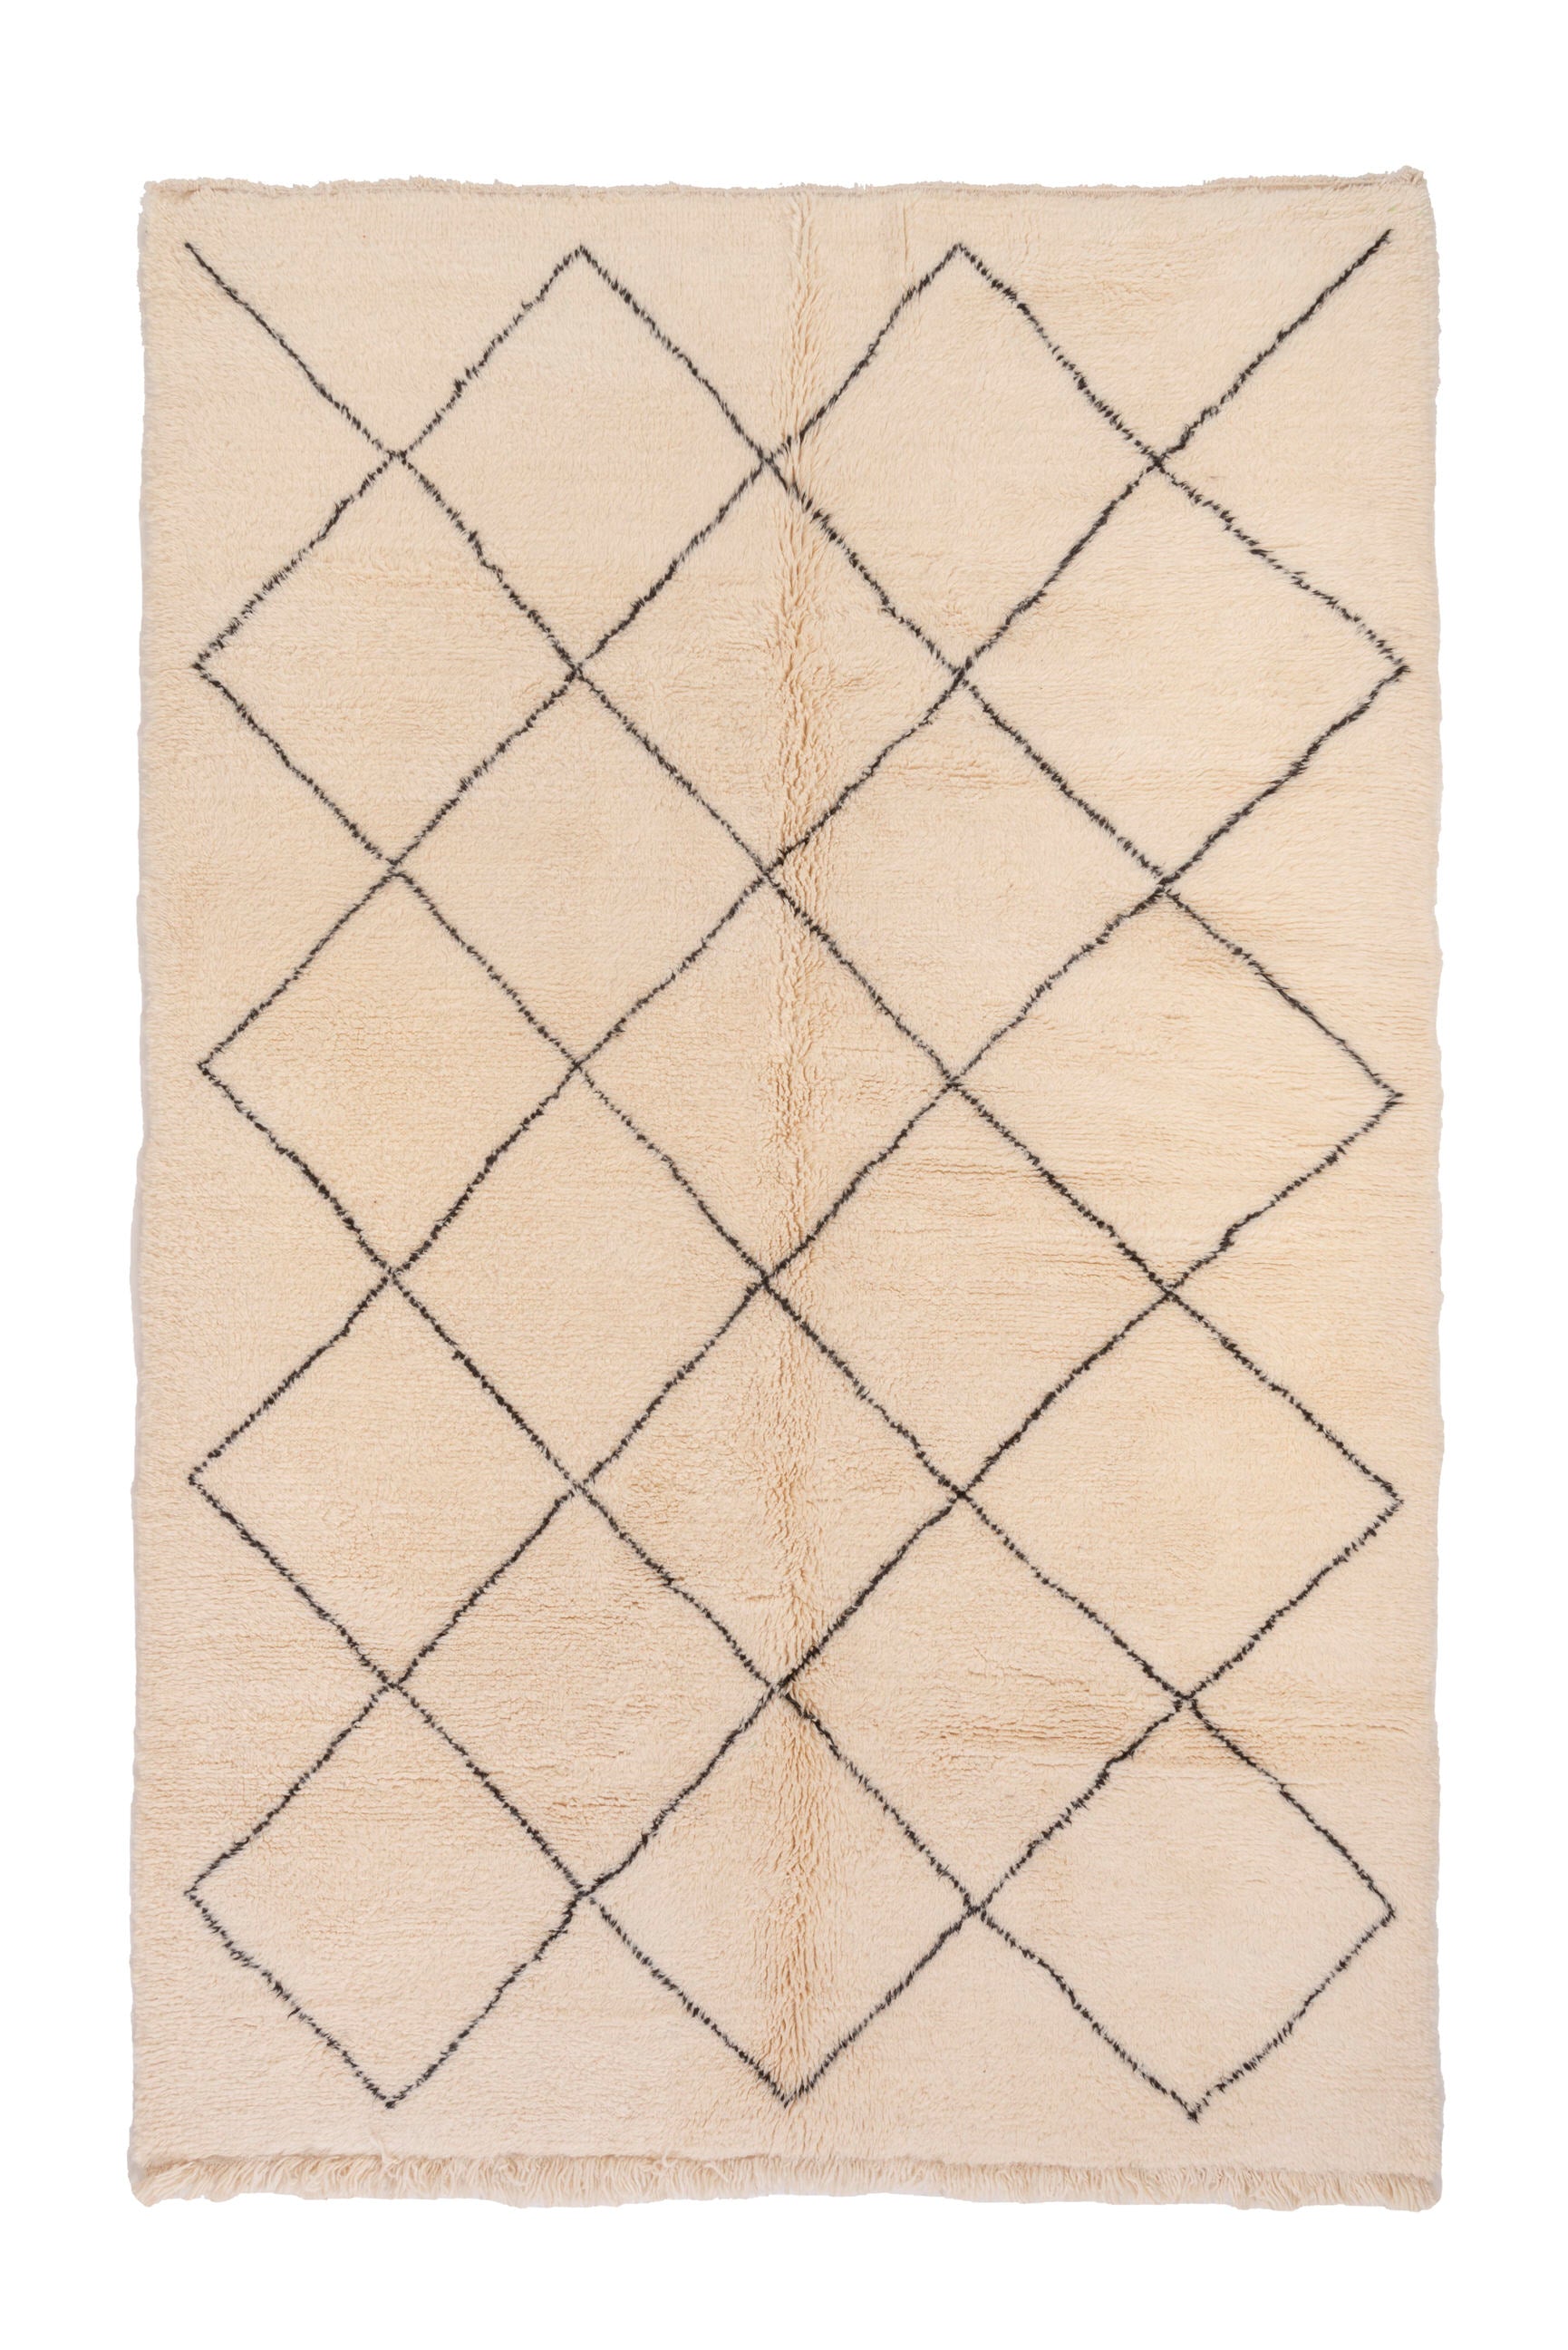 Elevate your space with our Ivory Classic Crisscross Beni Ourain Rug. This timeless piece features a traditional Moroccan crisscross design in ivory and black, adding warmth and sophistication to your decor.